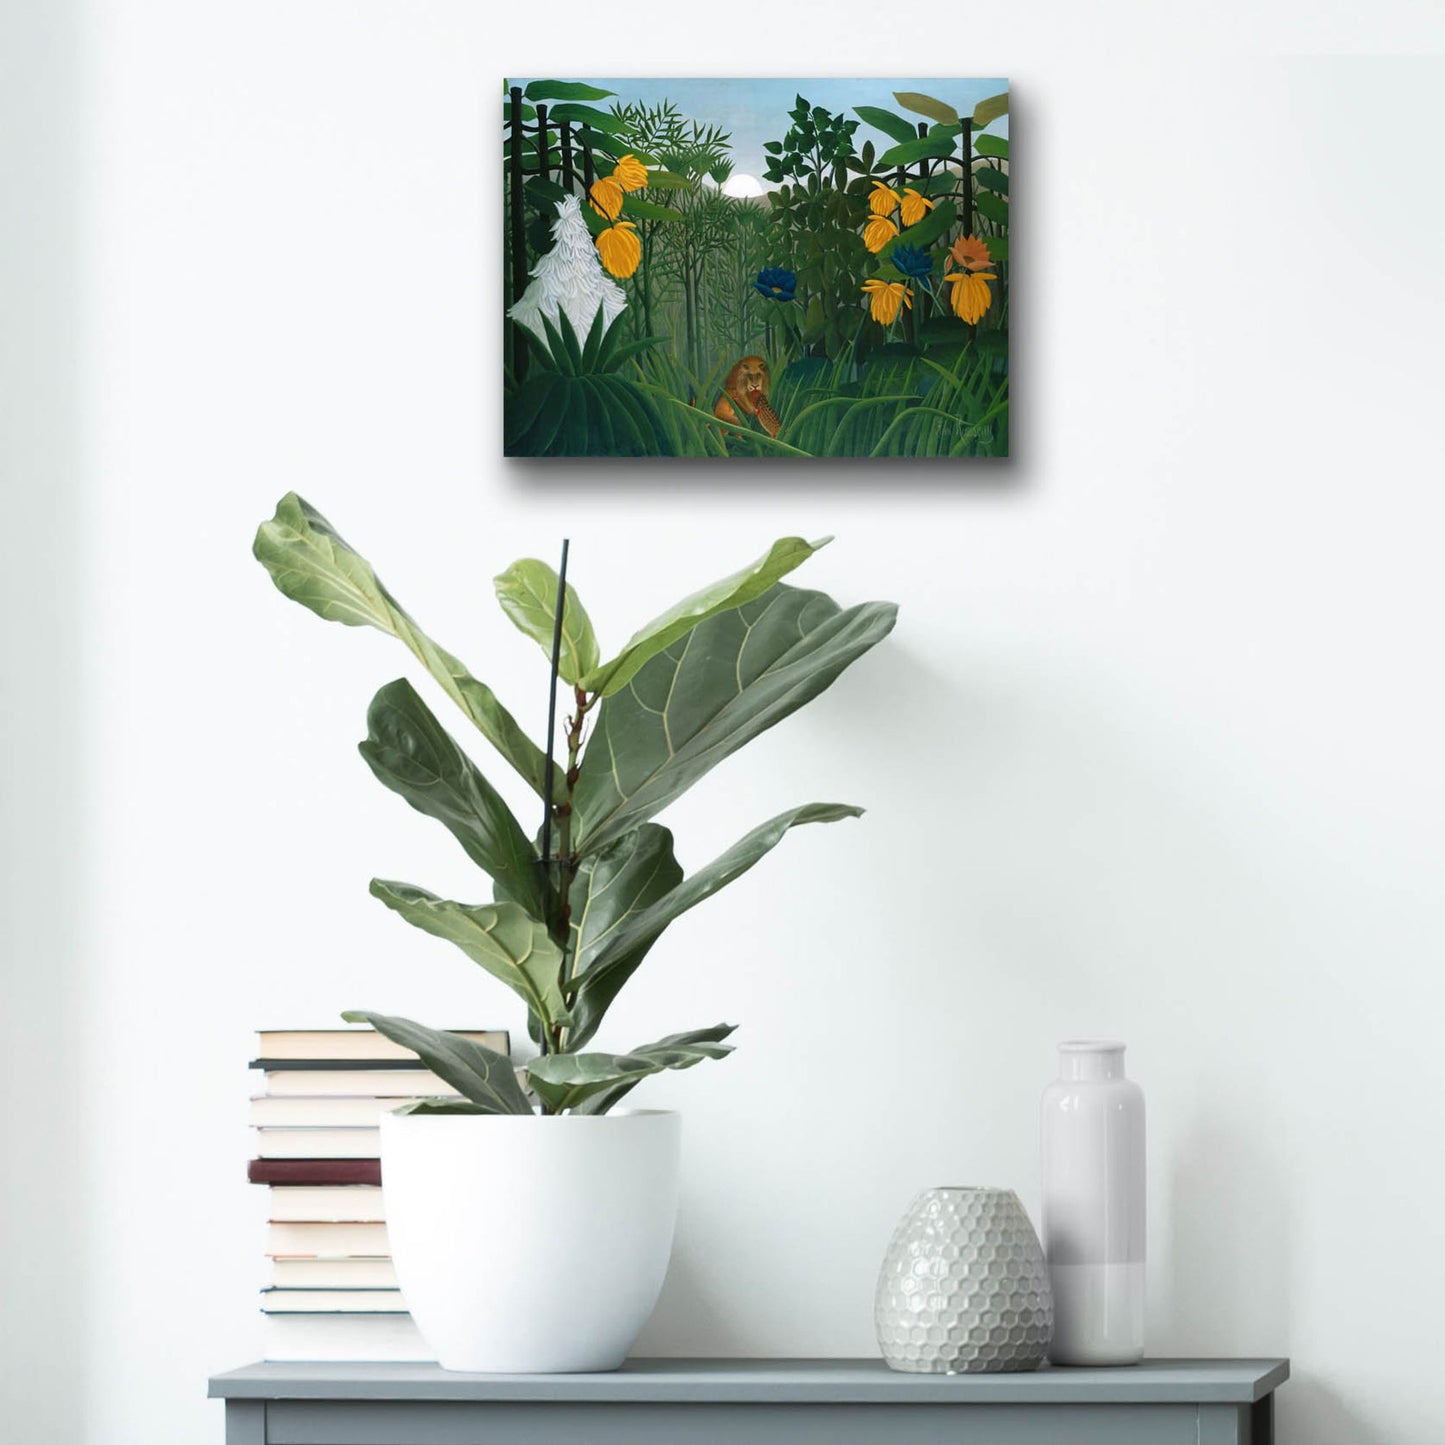 Epic Art ' The Repast of the Lion, 1907' by Henri Rousseau, Acrylic Glass Wall Art,16x12